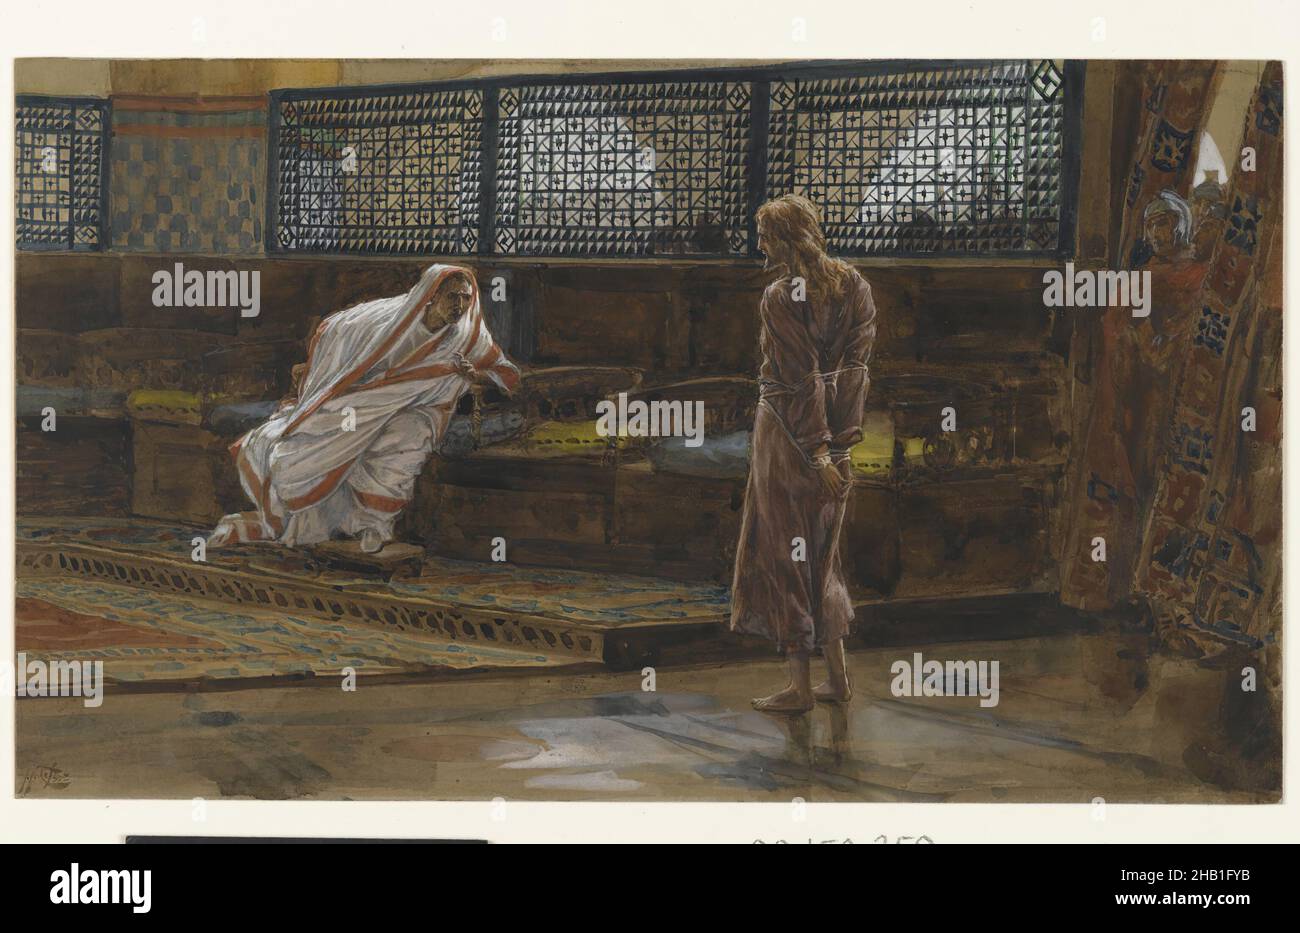 Jesus Before Pilate, First Interview, Jésus devant Pilate. Premier entretien., The Life of Our Lord Jesus Christ, La Vie de Notre-Seigneur Jésus-Christ, James Tissot, French, 1836-1902, Opaque watercolor over graphite on gray wove paper, France, 1886-1894, Image: 6 5/8 x 11 1/4 in., 16.8 x 28.6 cm, accused, Bible, Biblical, Catholicism, Christ, Christianity, creepy christian stories, French, God, guilt, hate, Hebrew, Jesus, Jewish, John 18:29-38, Religion, Religious Stock Photo